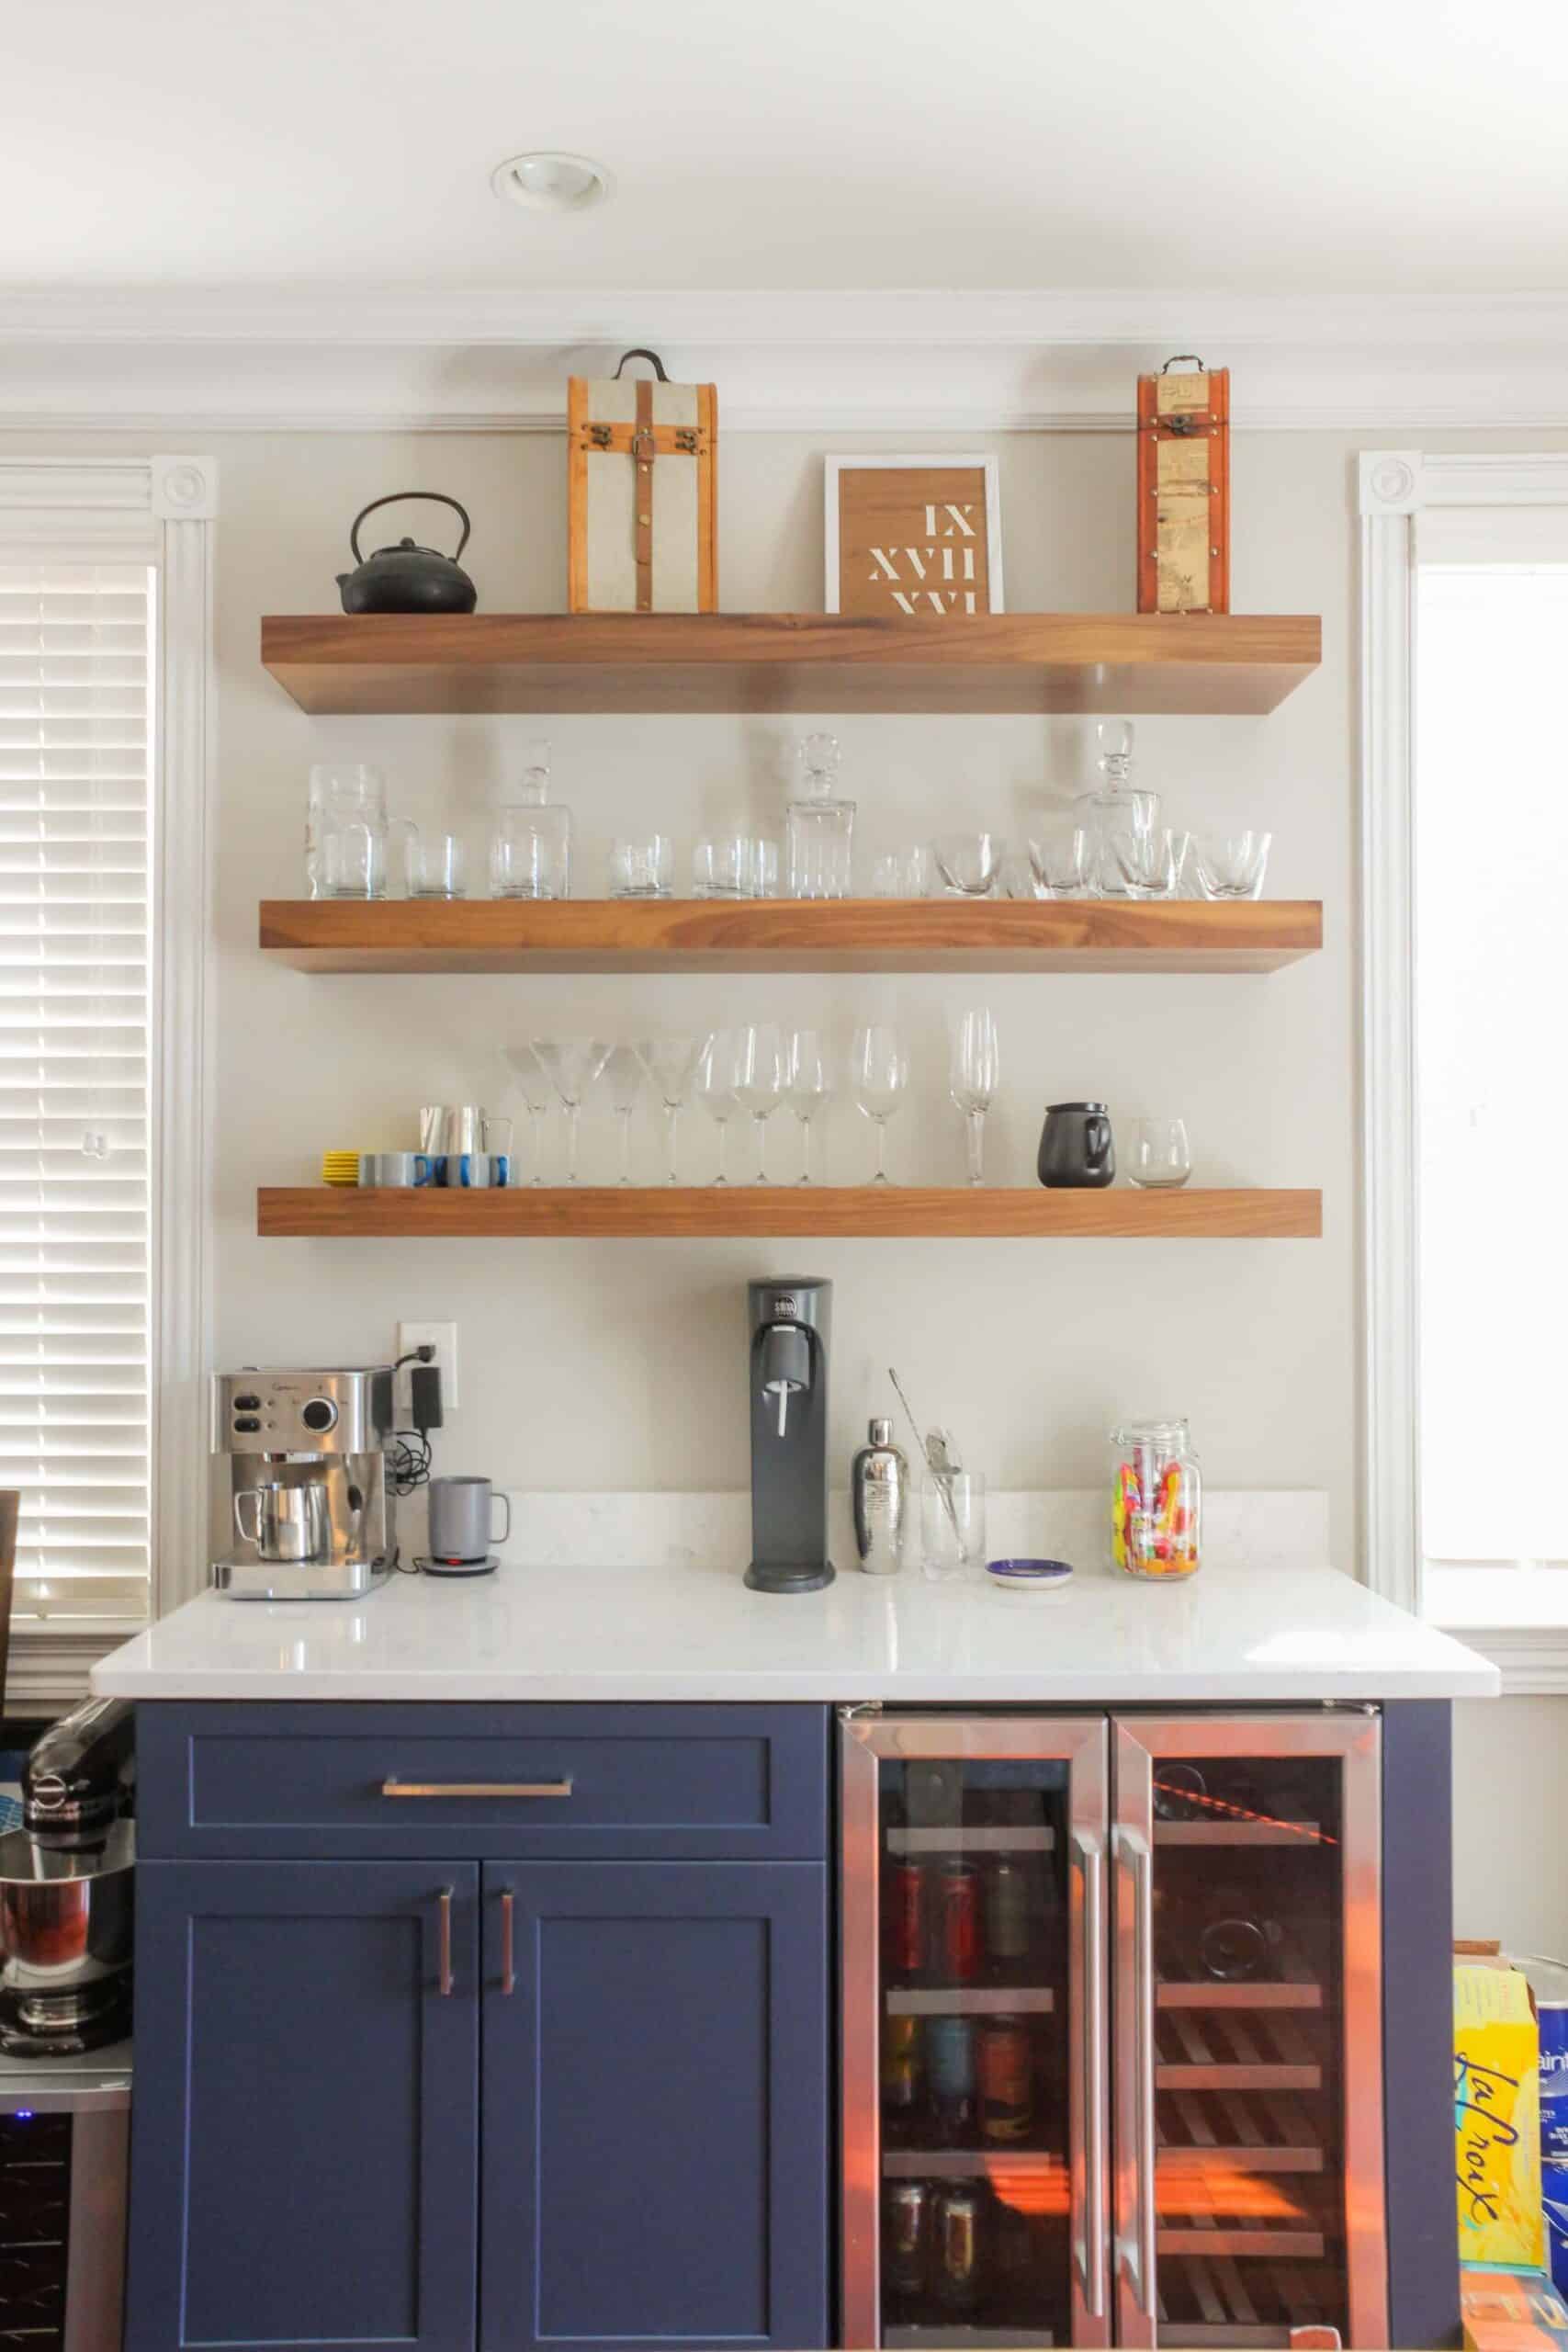 Fancy kitchen design with open shelf and navy blue cabinets, and wood flooring